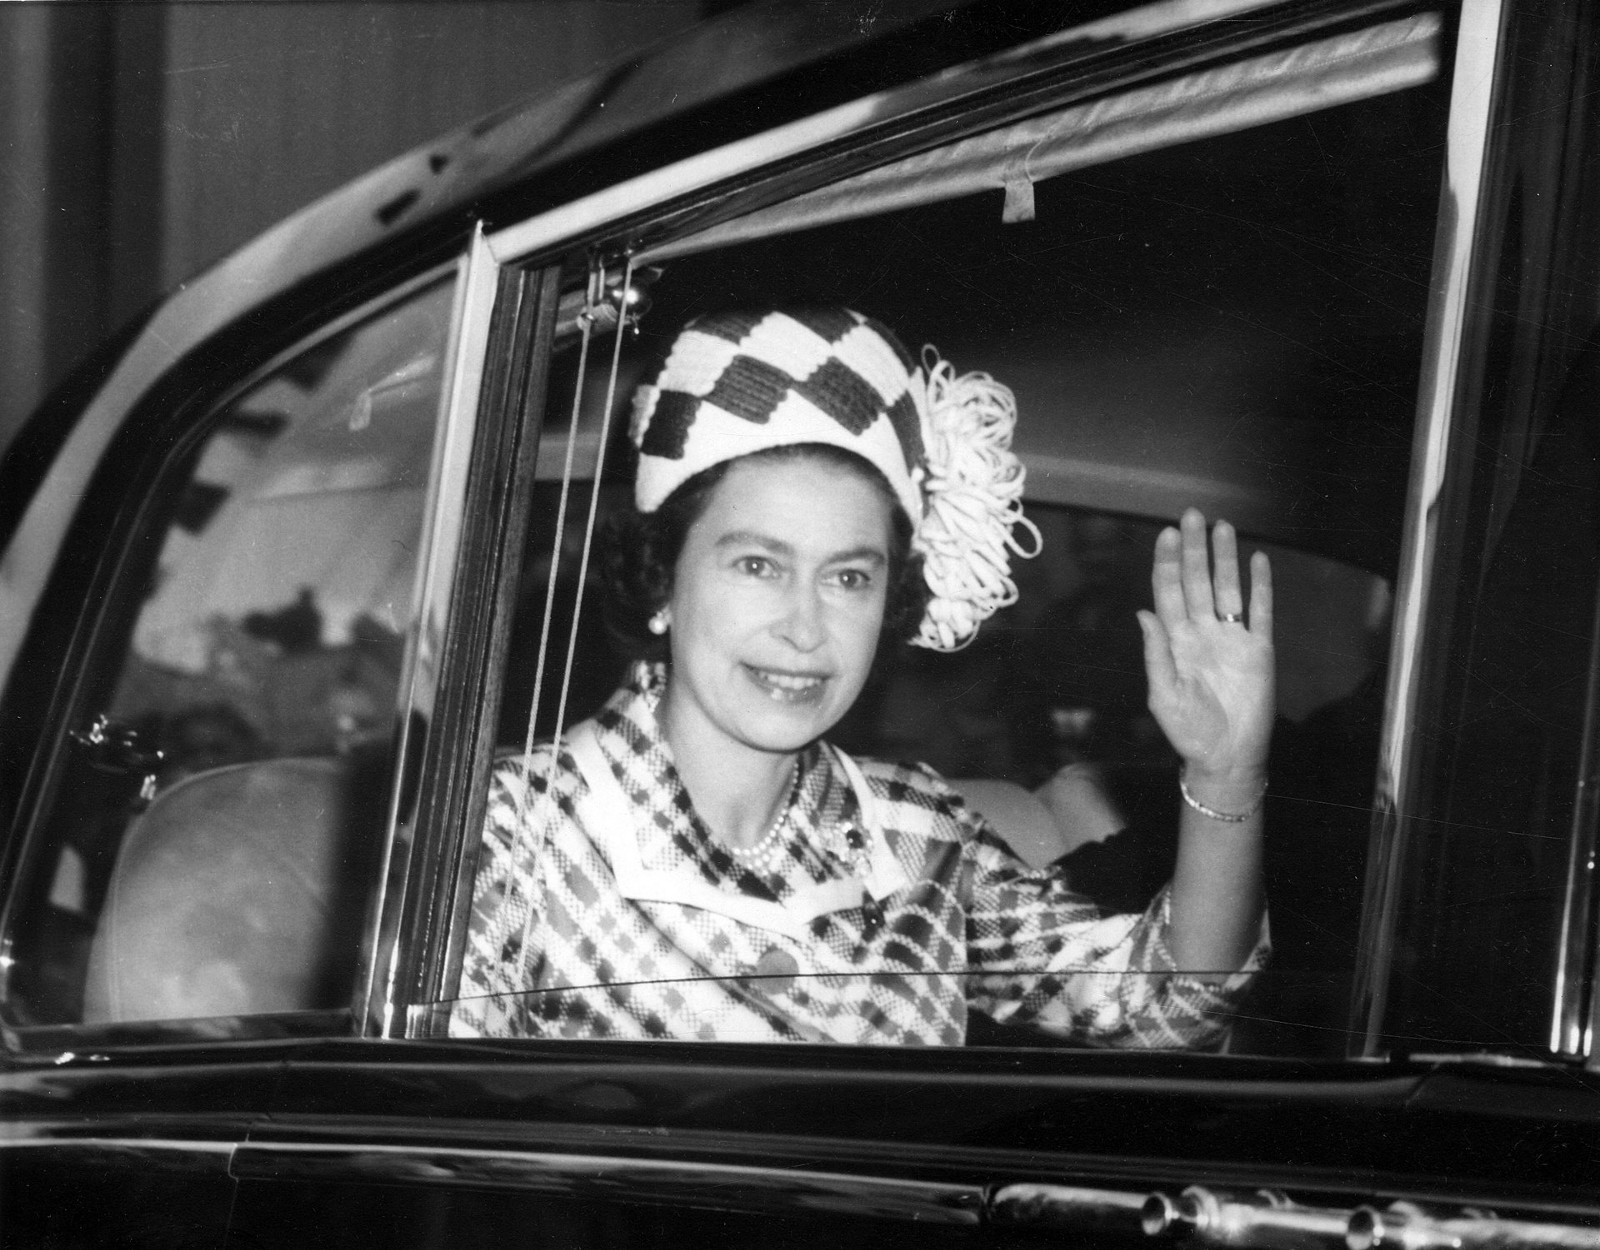 11 Things You Didn’t Know About The Queen